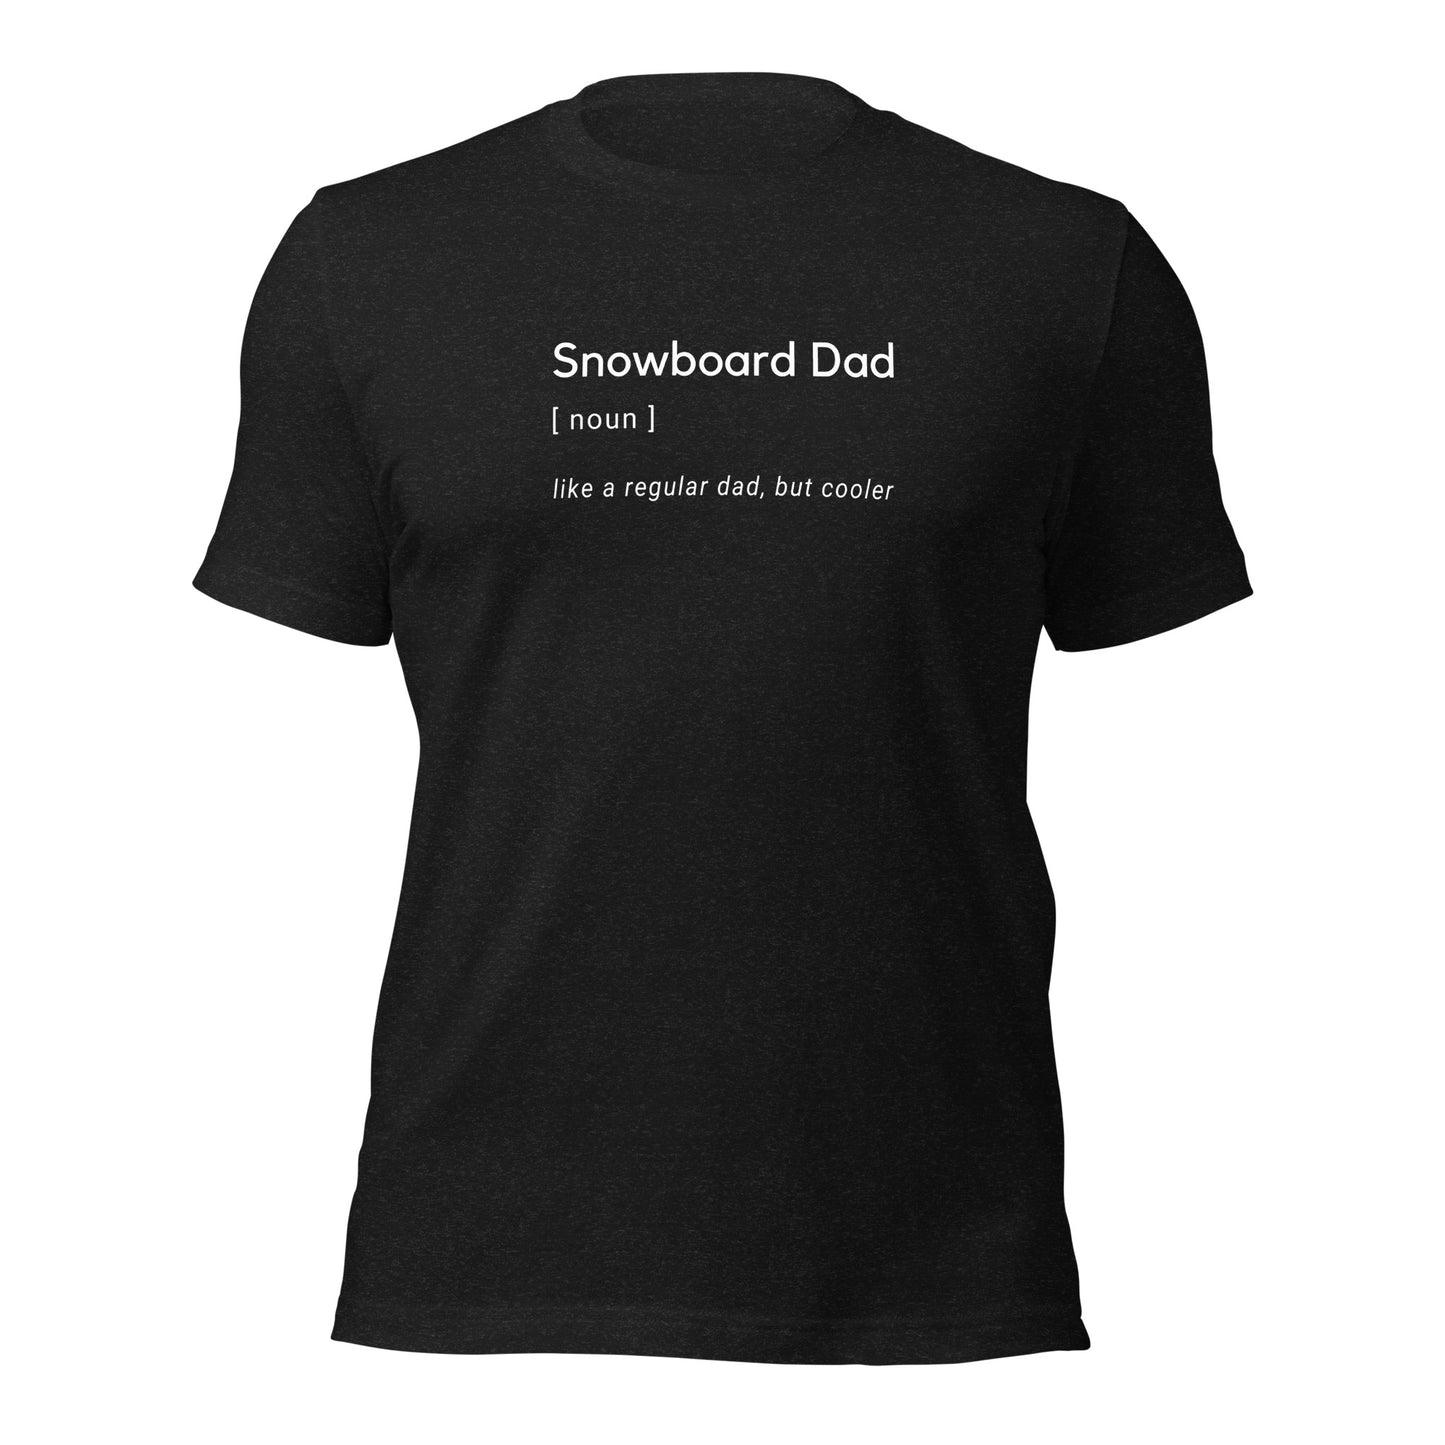 Snowboard Dad T-Shirt - Cool Vintage Snowboarding Tee for Dads